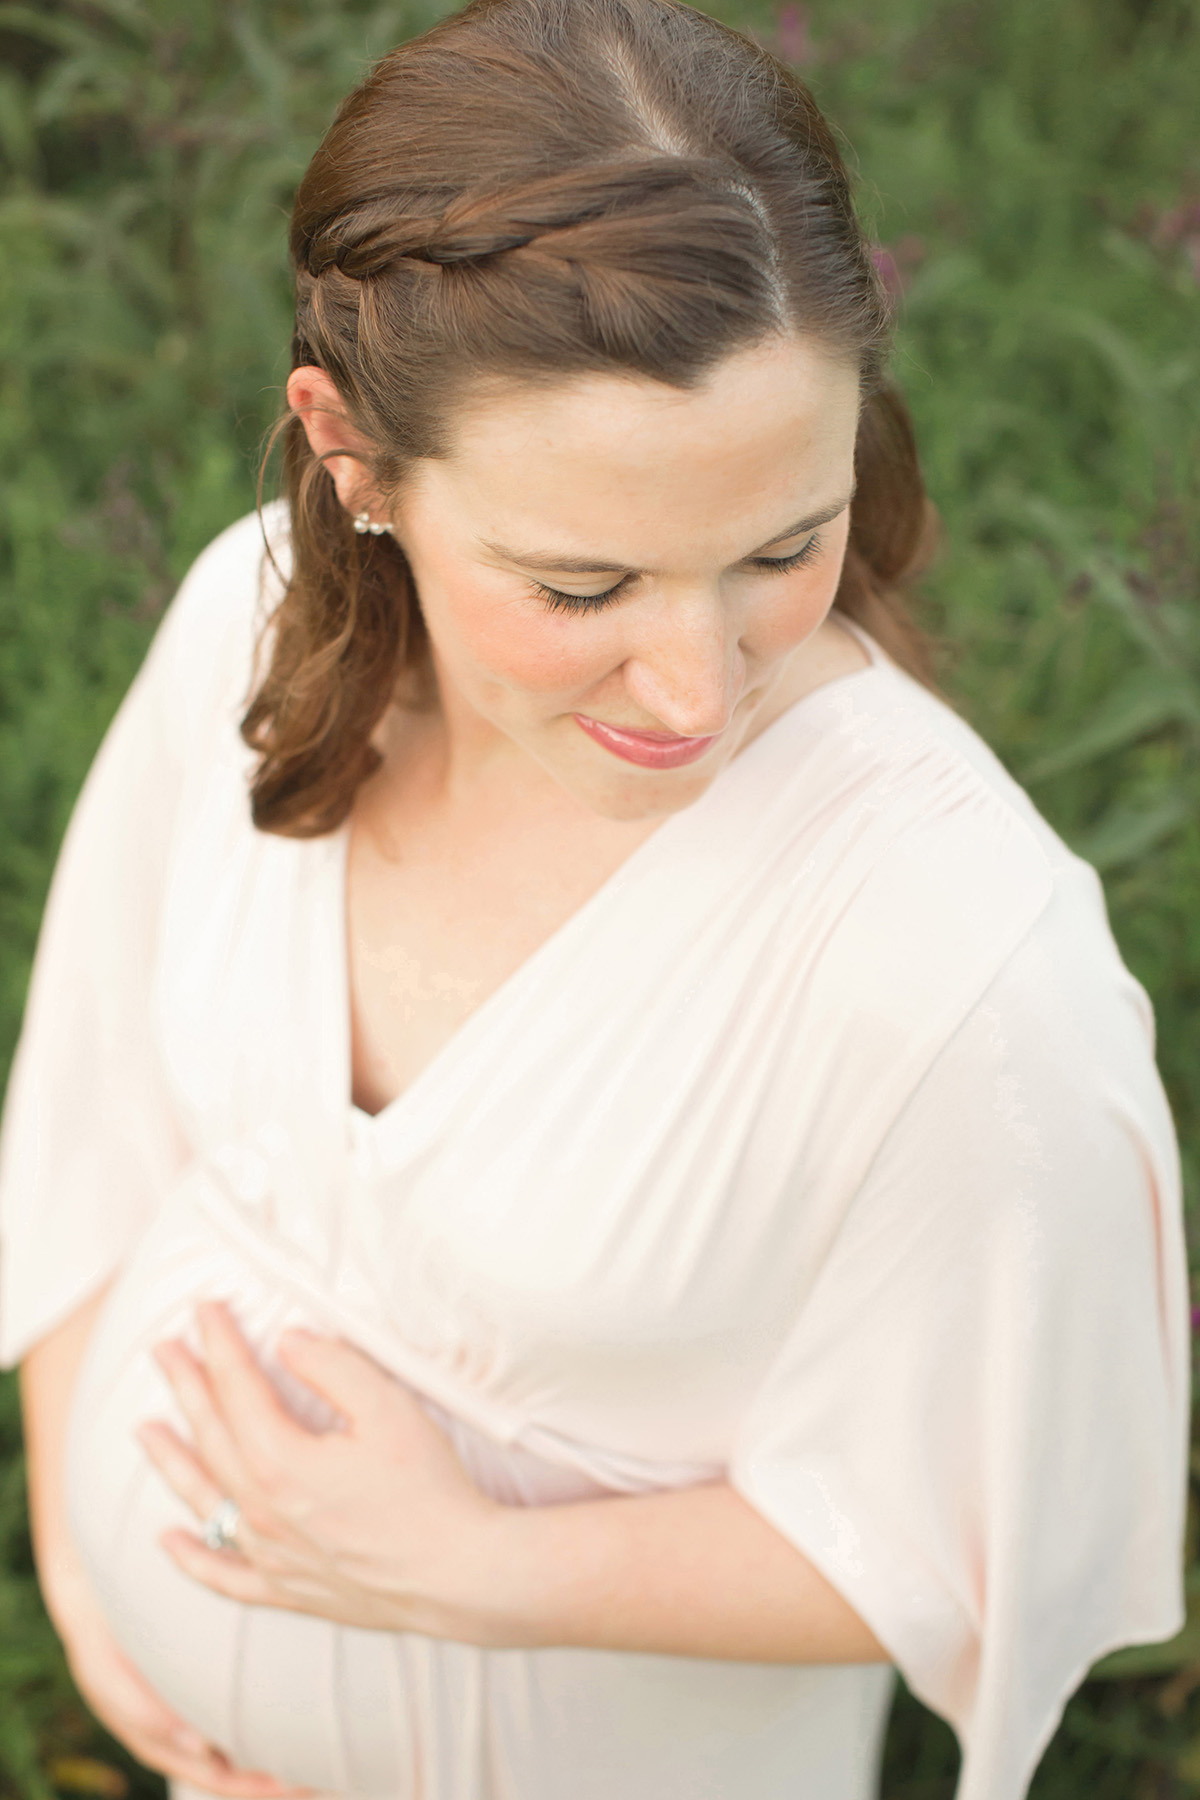 Louisville KY Maternity Photographer | Outdoor Field Session for Expectant mother | Julie Brock Photography | Dress for Photo shoot.jpg